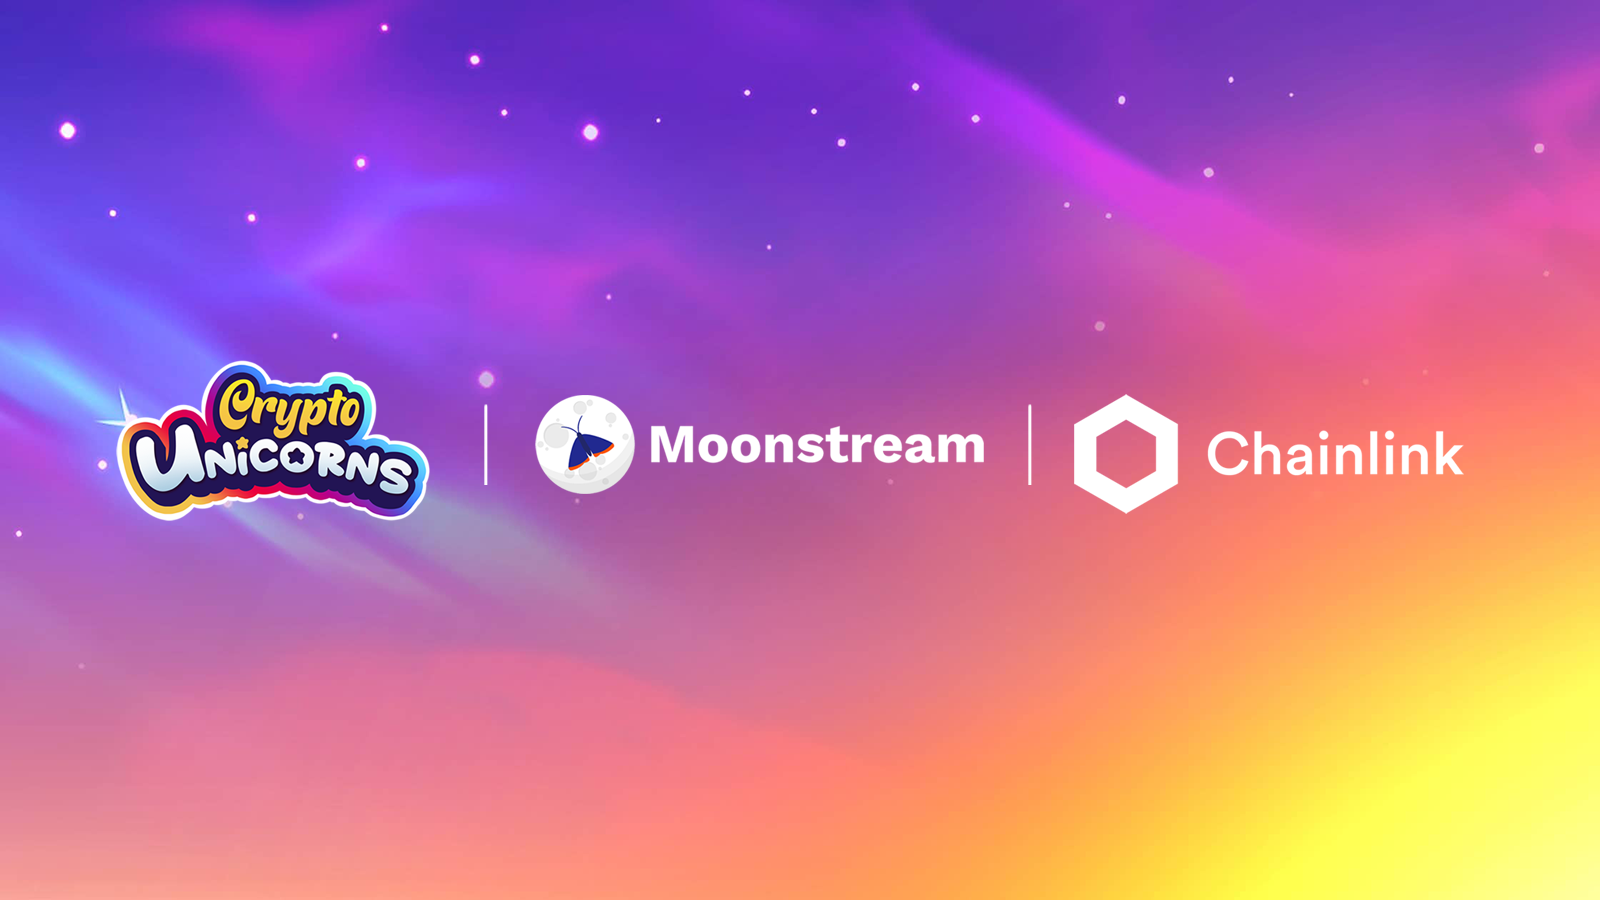 Moonstream DAO Uses Chainlink VRF to Power Randomized In-Game Rewards for Crypto Unicorns